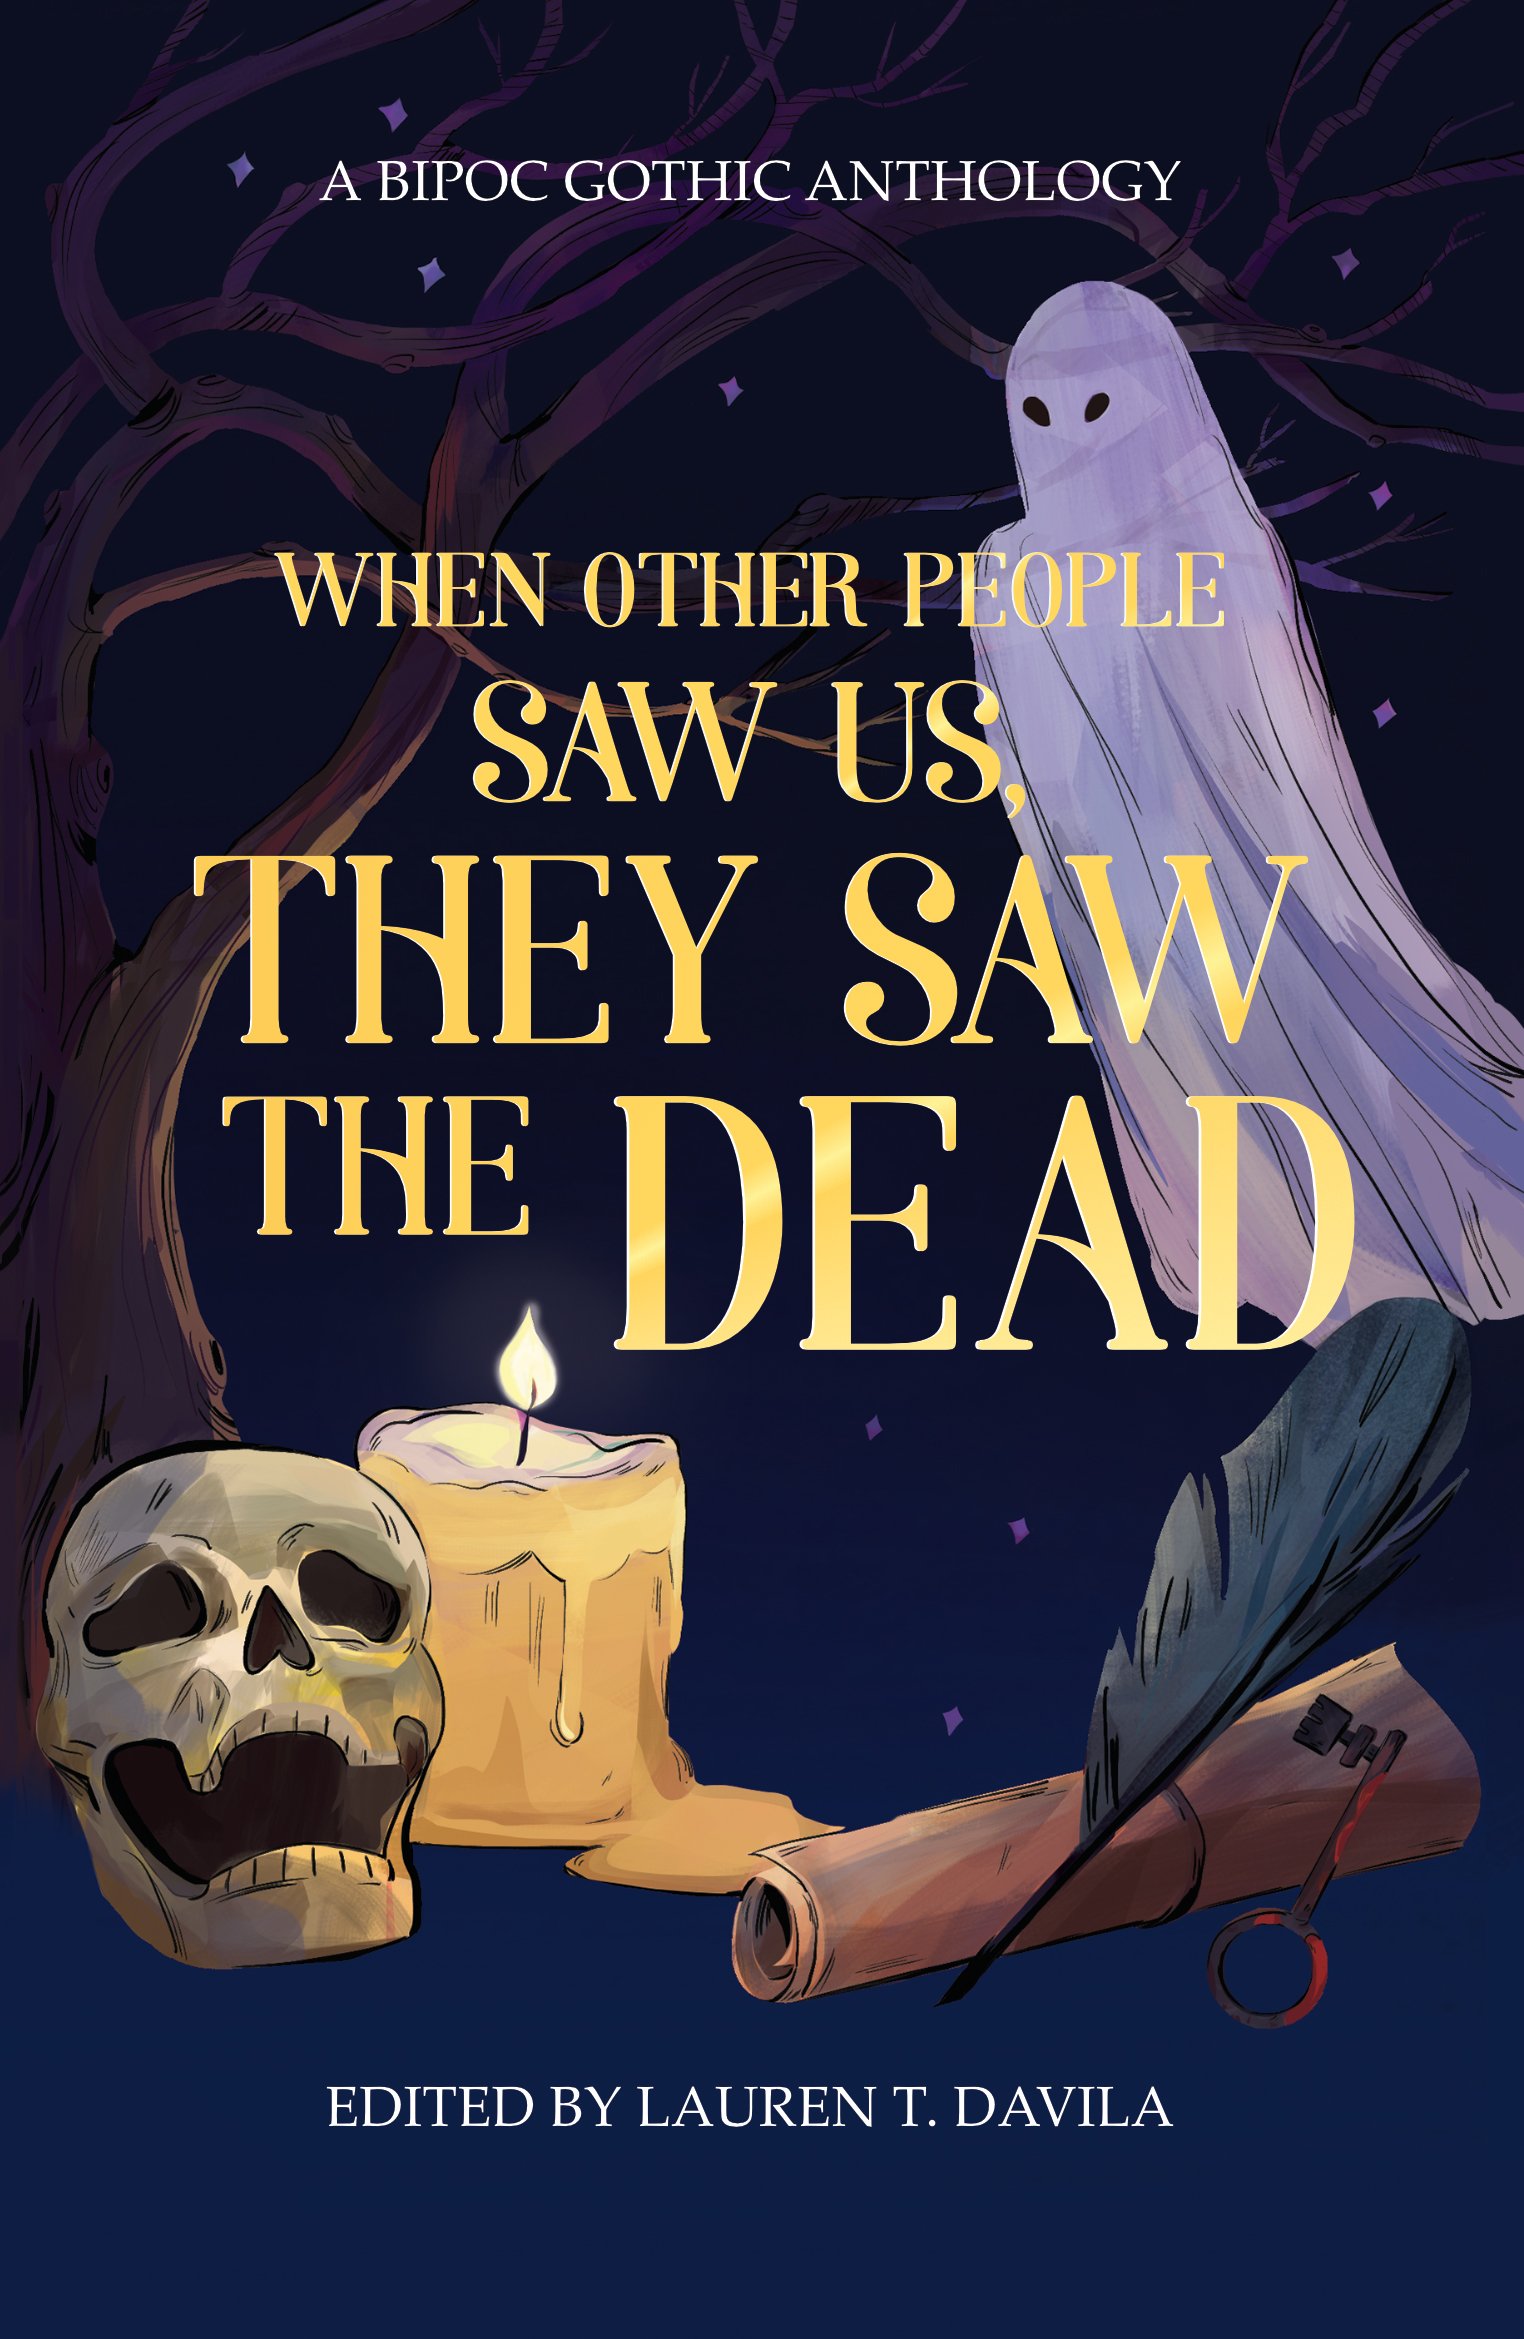 Lauren T. Davila: When Other People Saw Us, They Saw the Dead (EBook, 2022, Haunt Publishing)